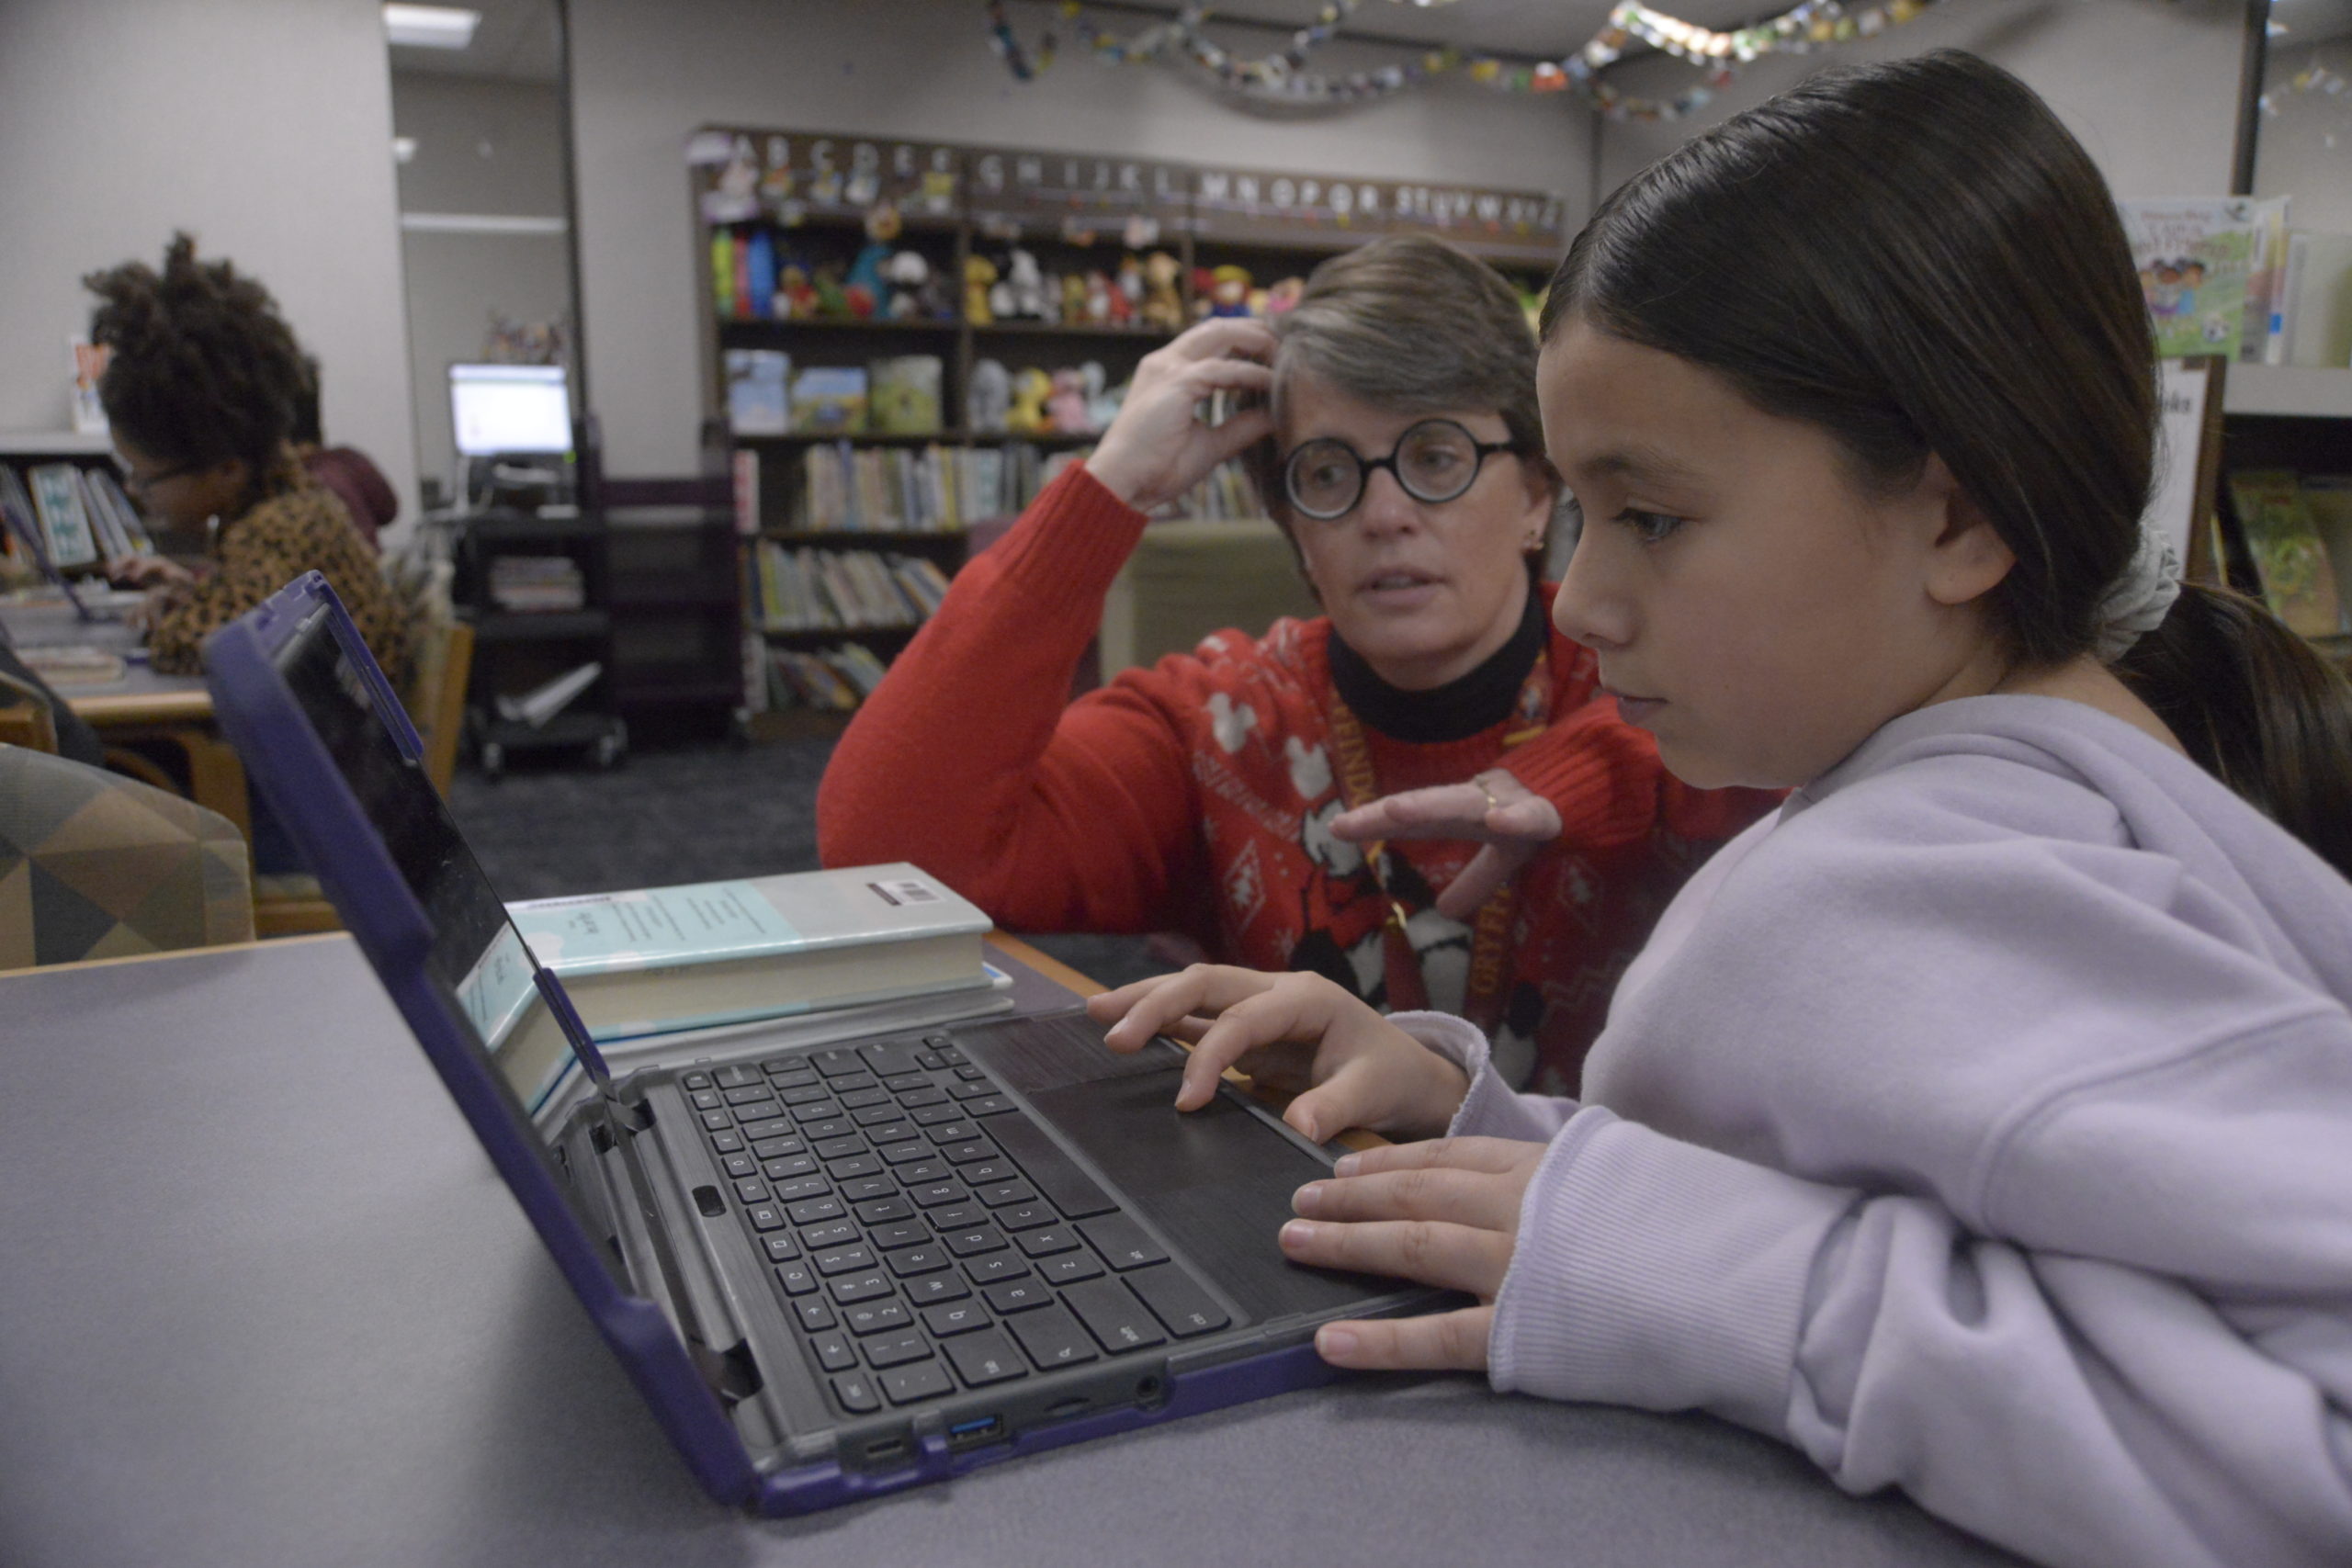 Students Learn Video Editing and More with WTEF Grant